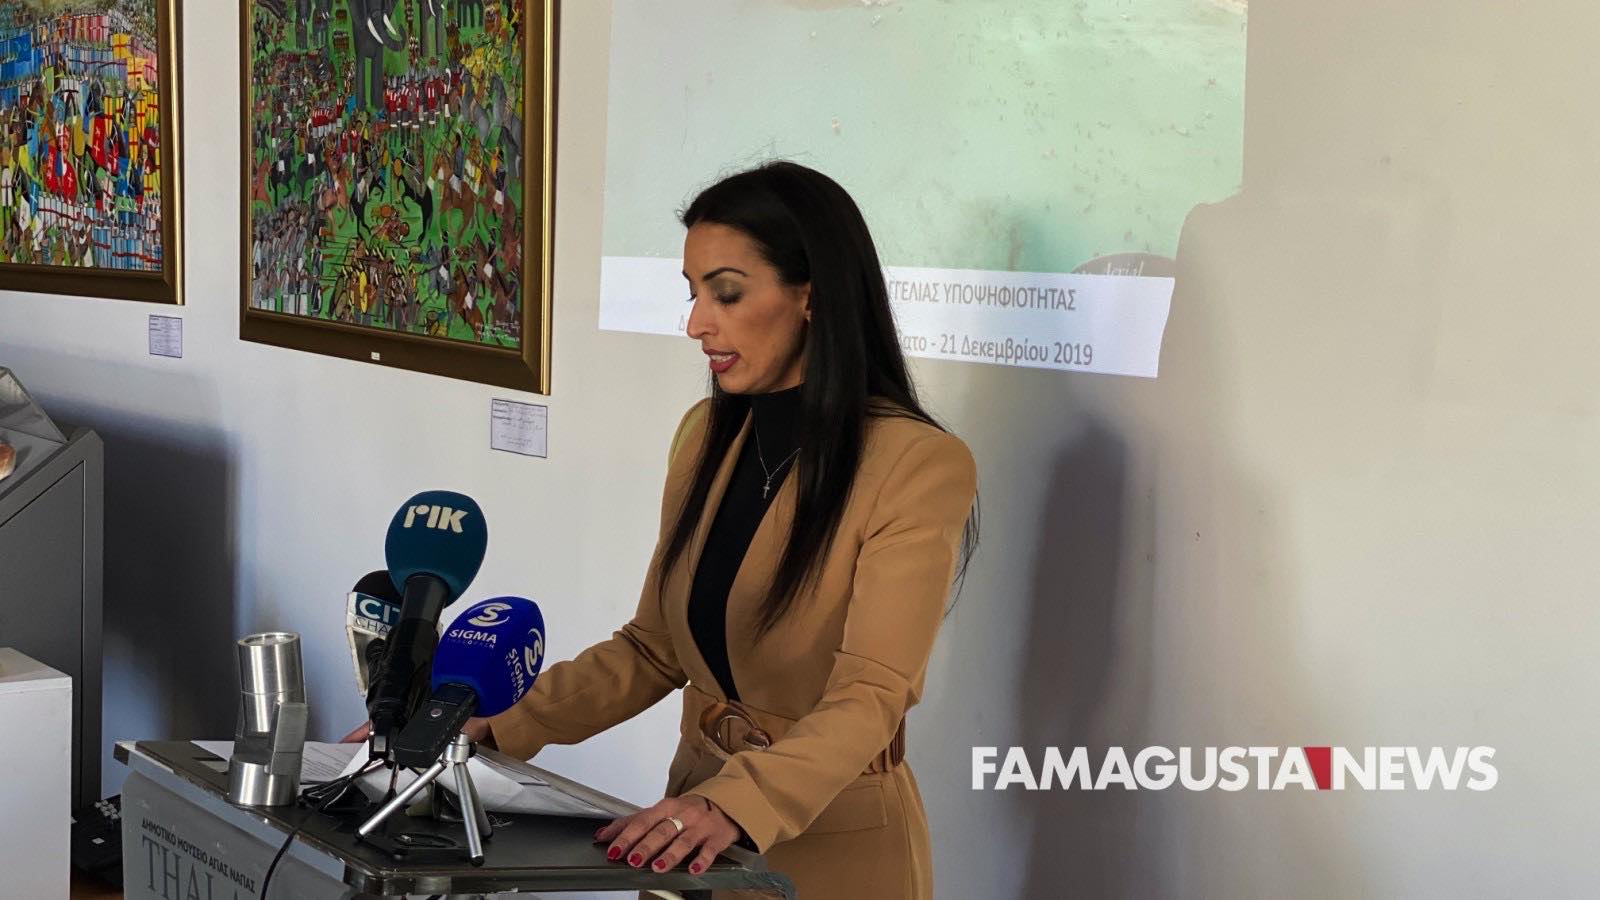 79682671 2982983108412885 1138371705891192832 n exclusive, Emilia Evangelou - Xydia, Municipality of Ayia Napa, Municipal Elections, Elections, Nea Famagusta, Local Government, CANDIDATE